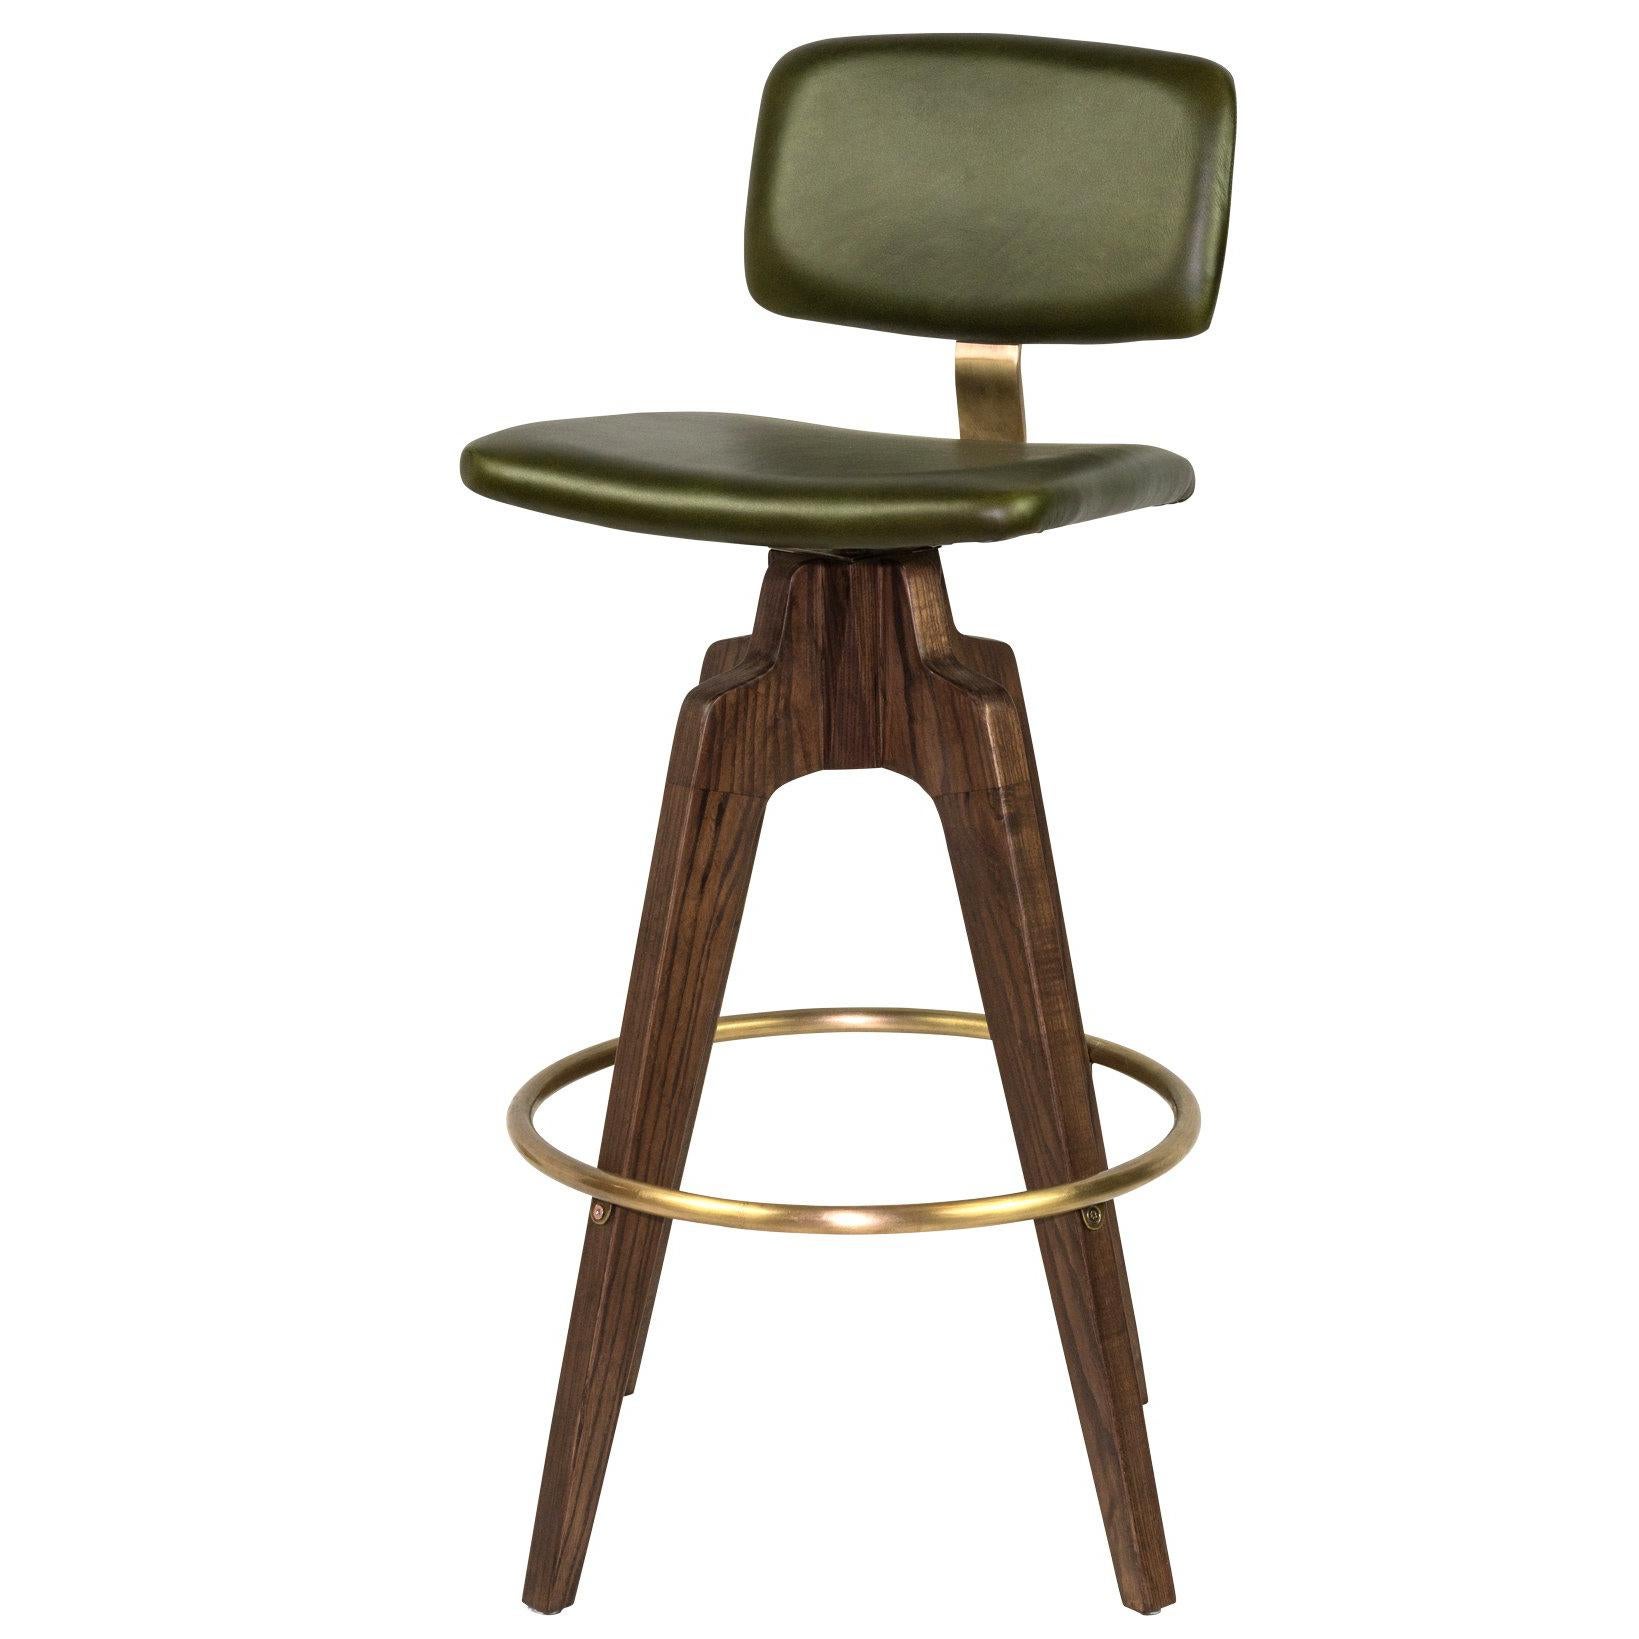 Reeves Swivel Bar Stool W/ Ash legs stained Walnut, Leather & Brass Finish.  For Sale